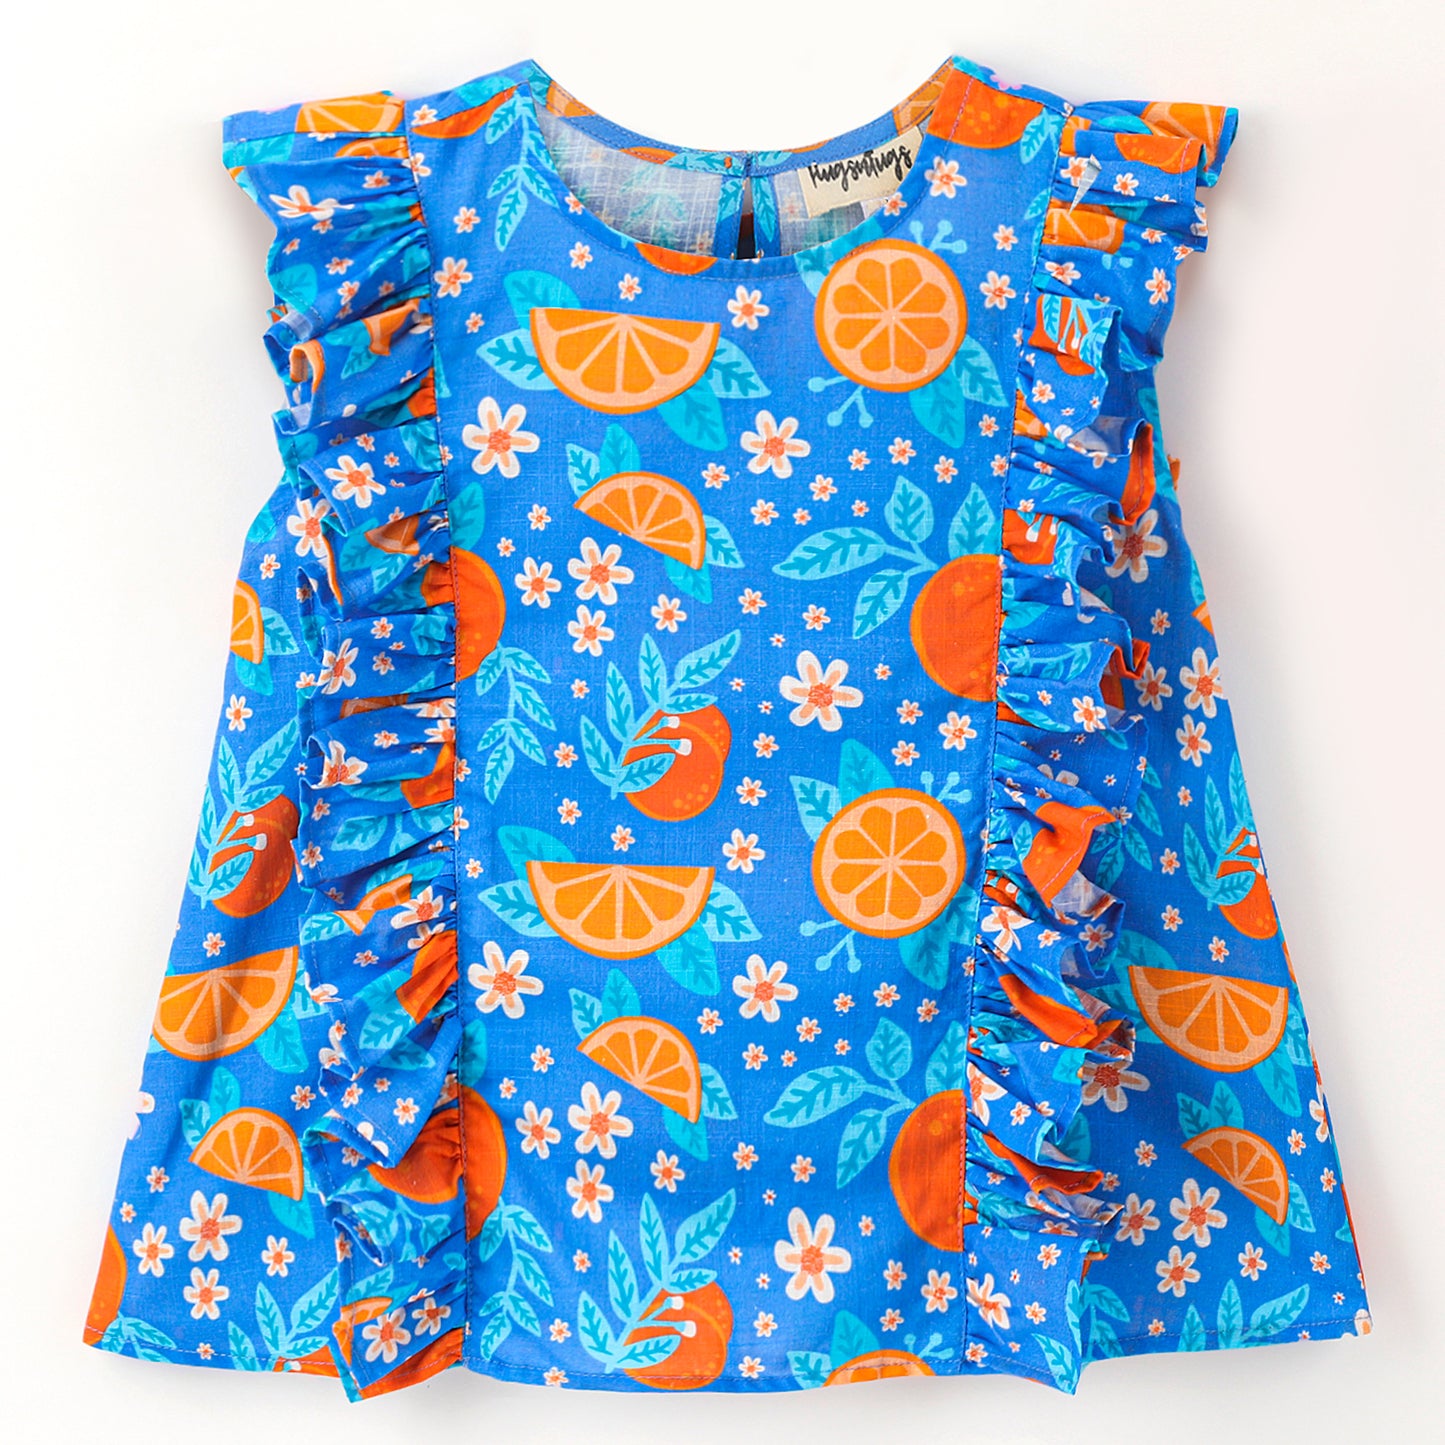 Blue fruit print top with frills along front side